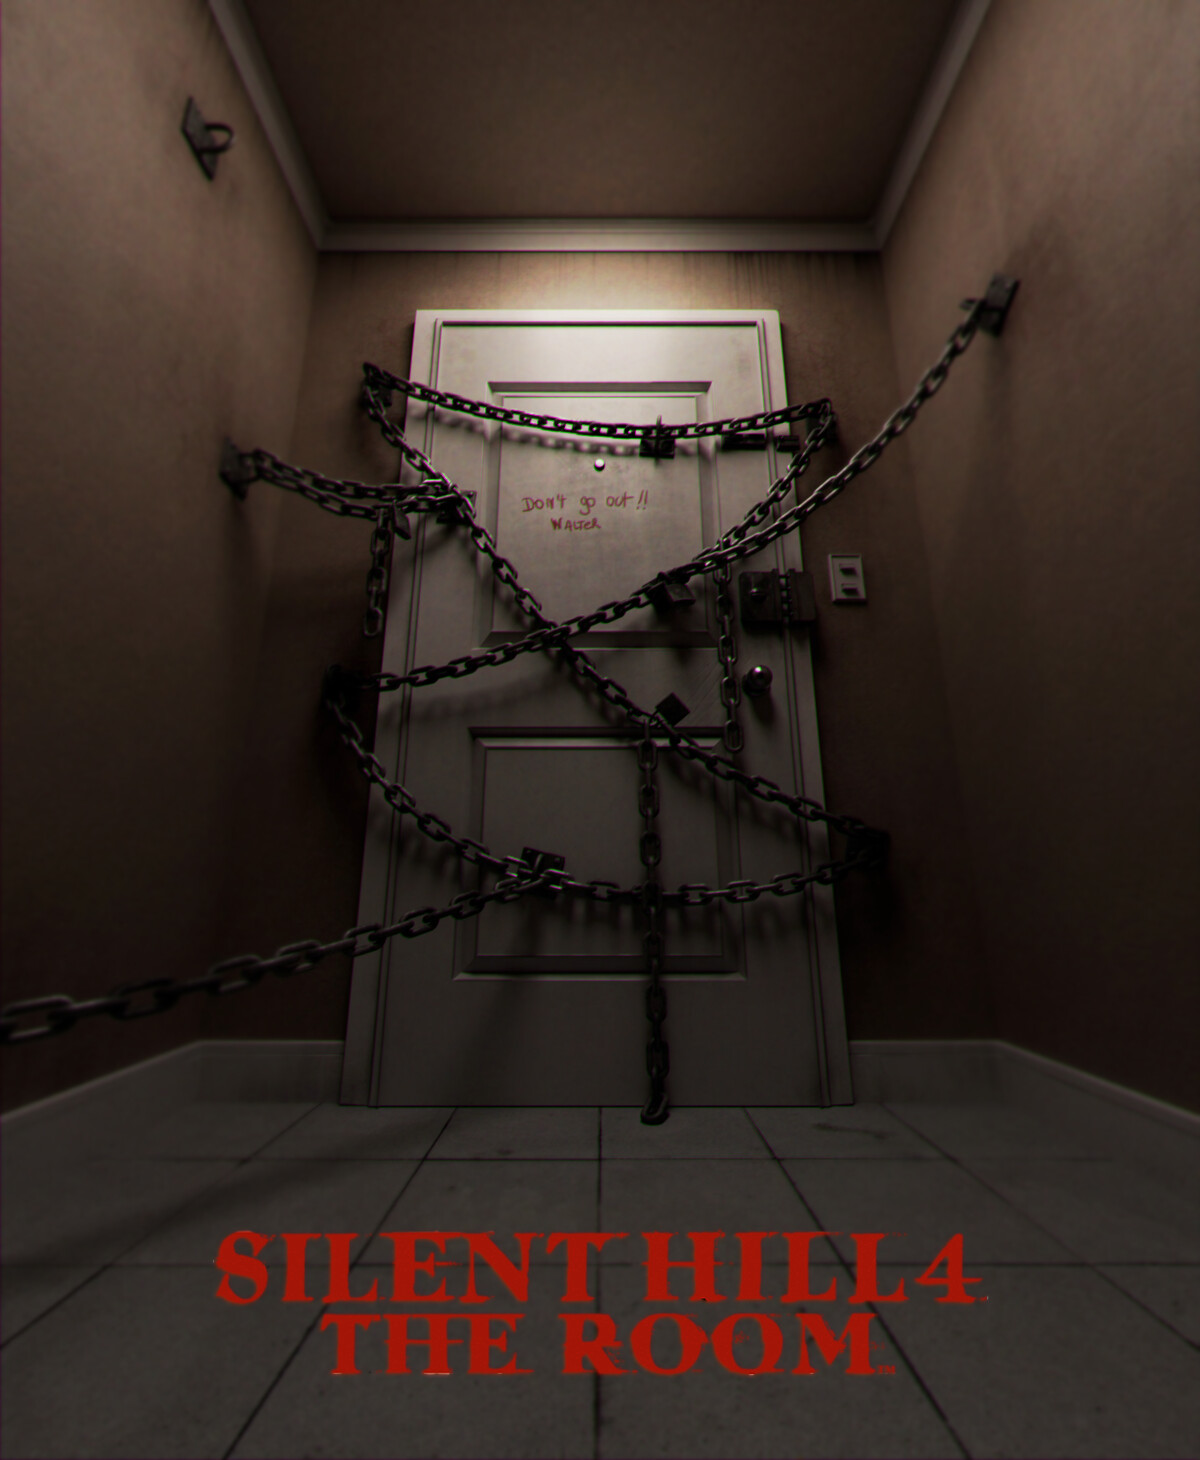 SILENT HILL 4: THE ROOM (PS5 CONCEPT) on Behance